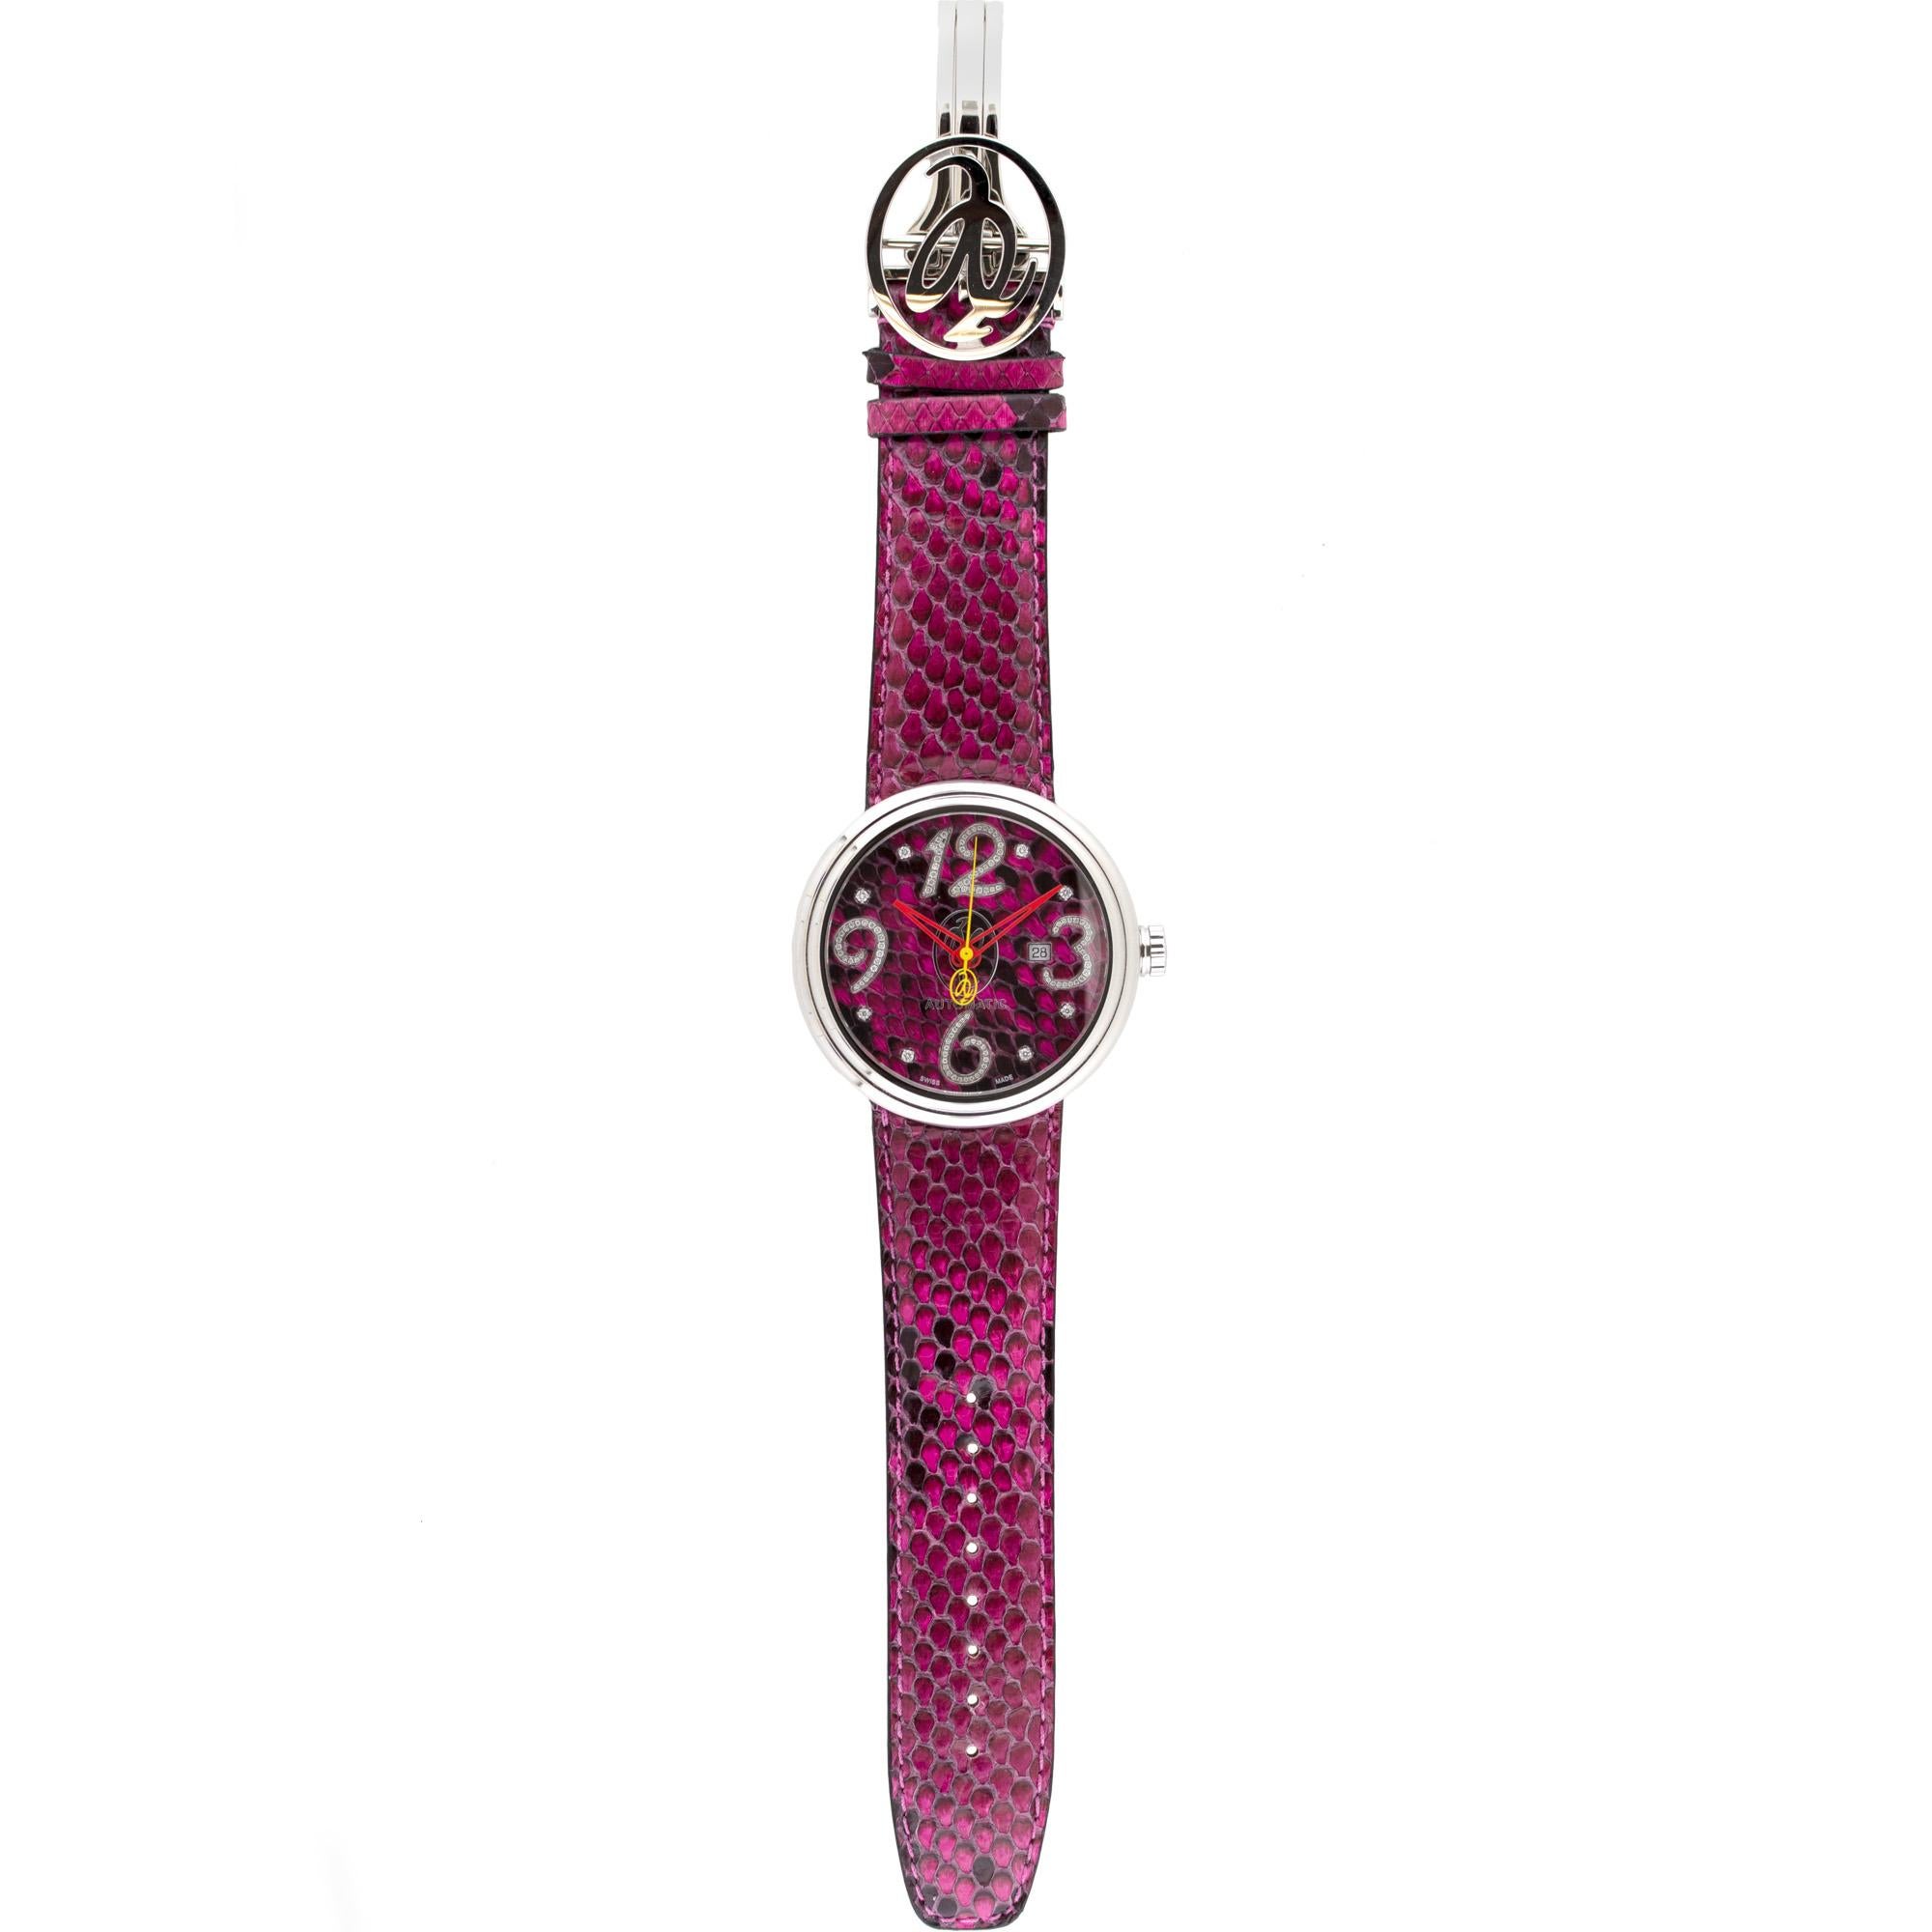 Brand: Jacob & Co.
MPN: WVY-018
Case Material: Stainless Steel
Case Diameter: 48mm
Crystal: Scratch resistant sapphire crystal
Dial: Fuchsia Python-Pattern with Diamond hour markers
Bracelet: Fuchsia Python Leather
Size: Adjustable
Clasp: Fold over